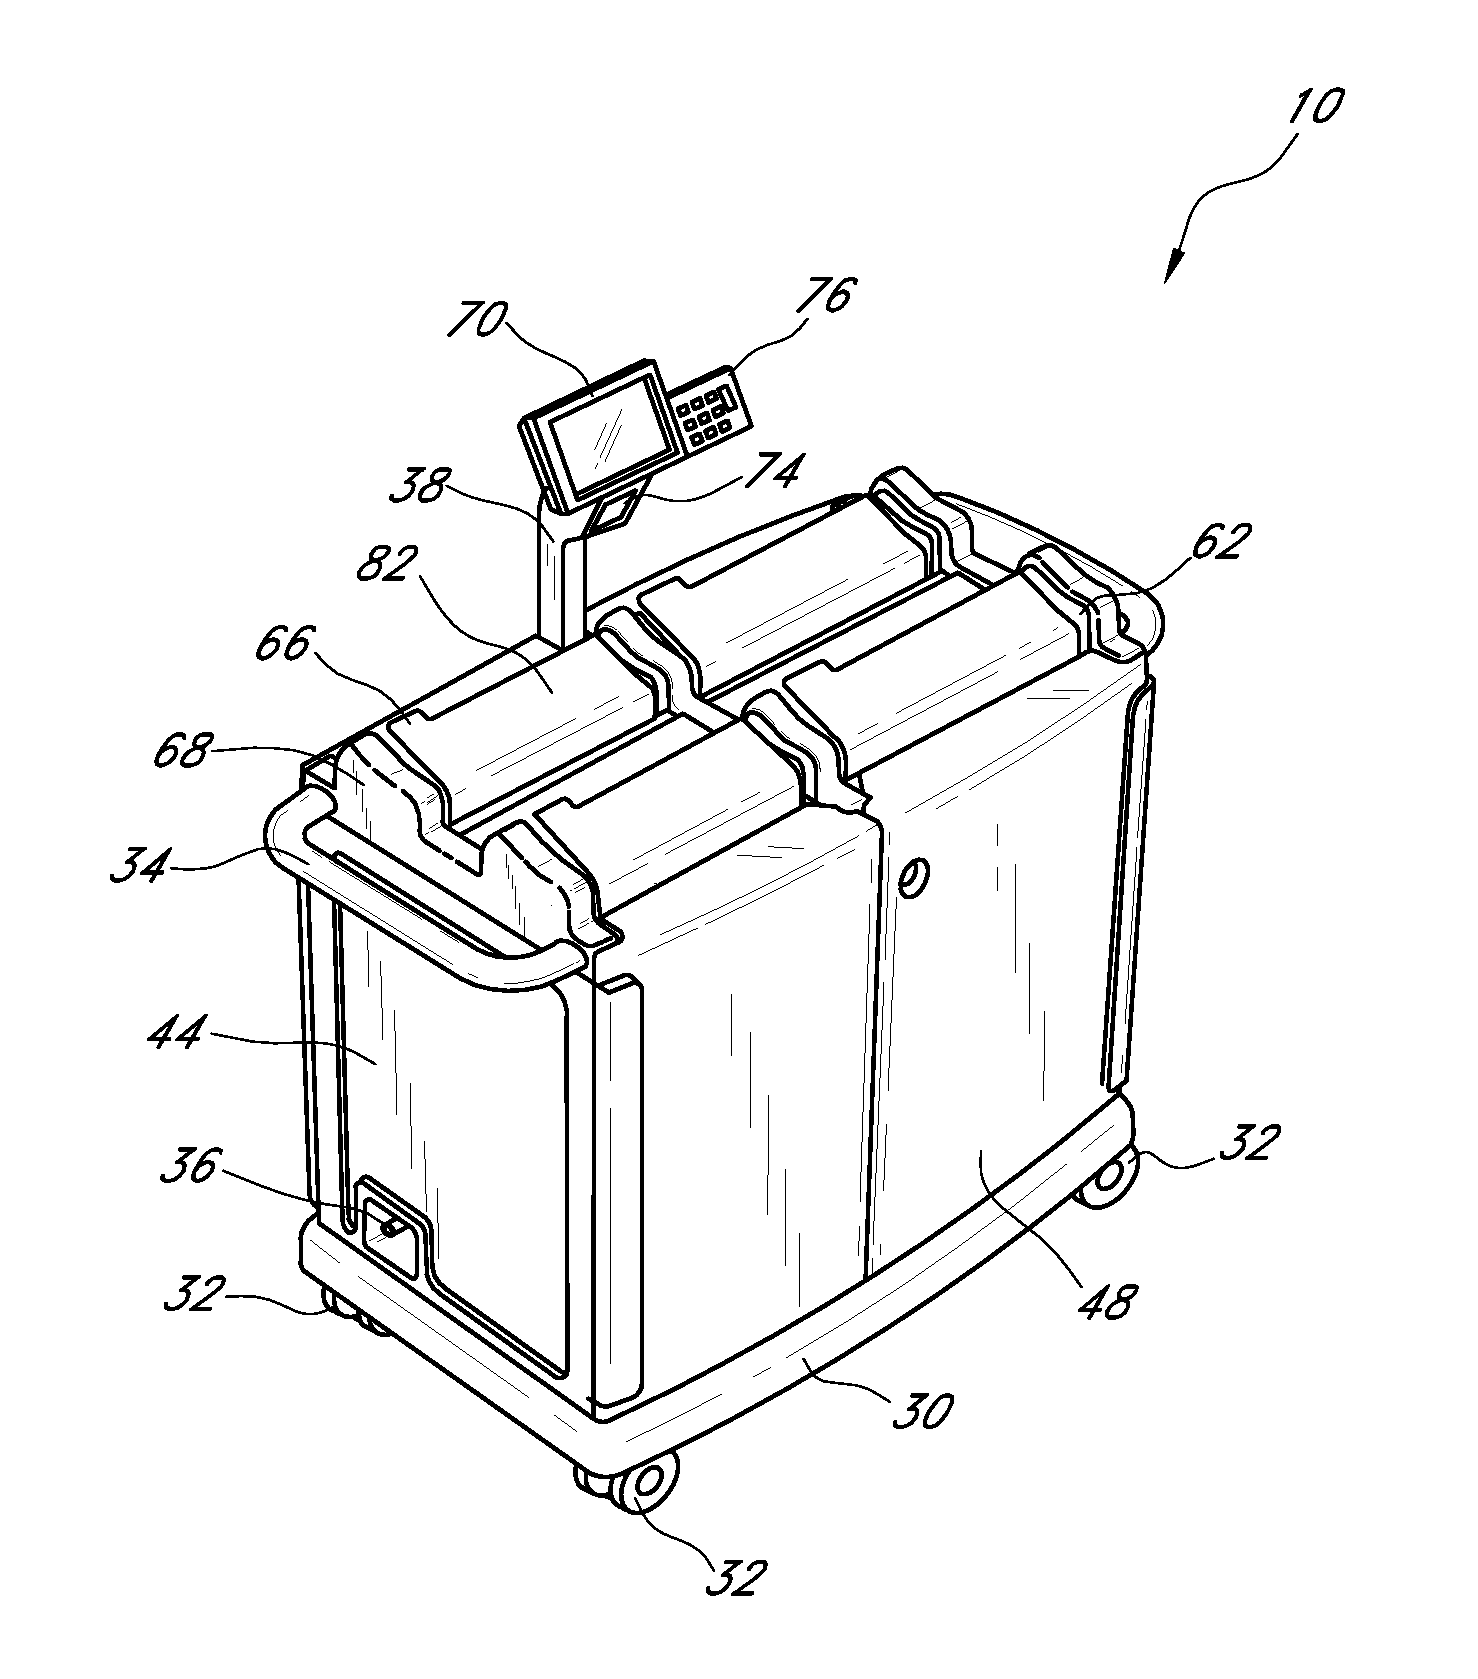 Systems and methods for disposing narcotic and other regulated waste